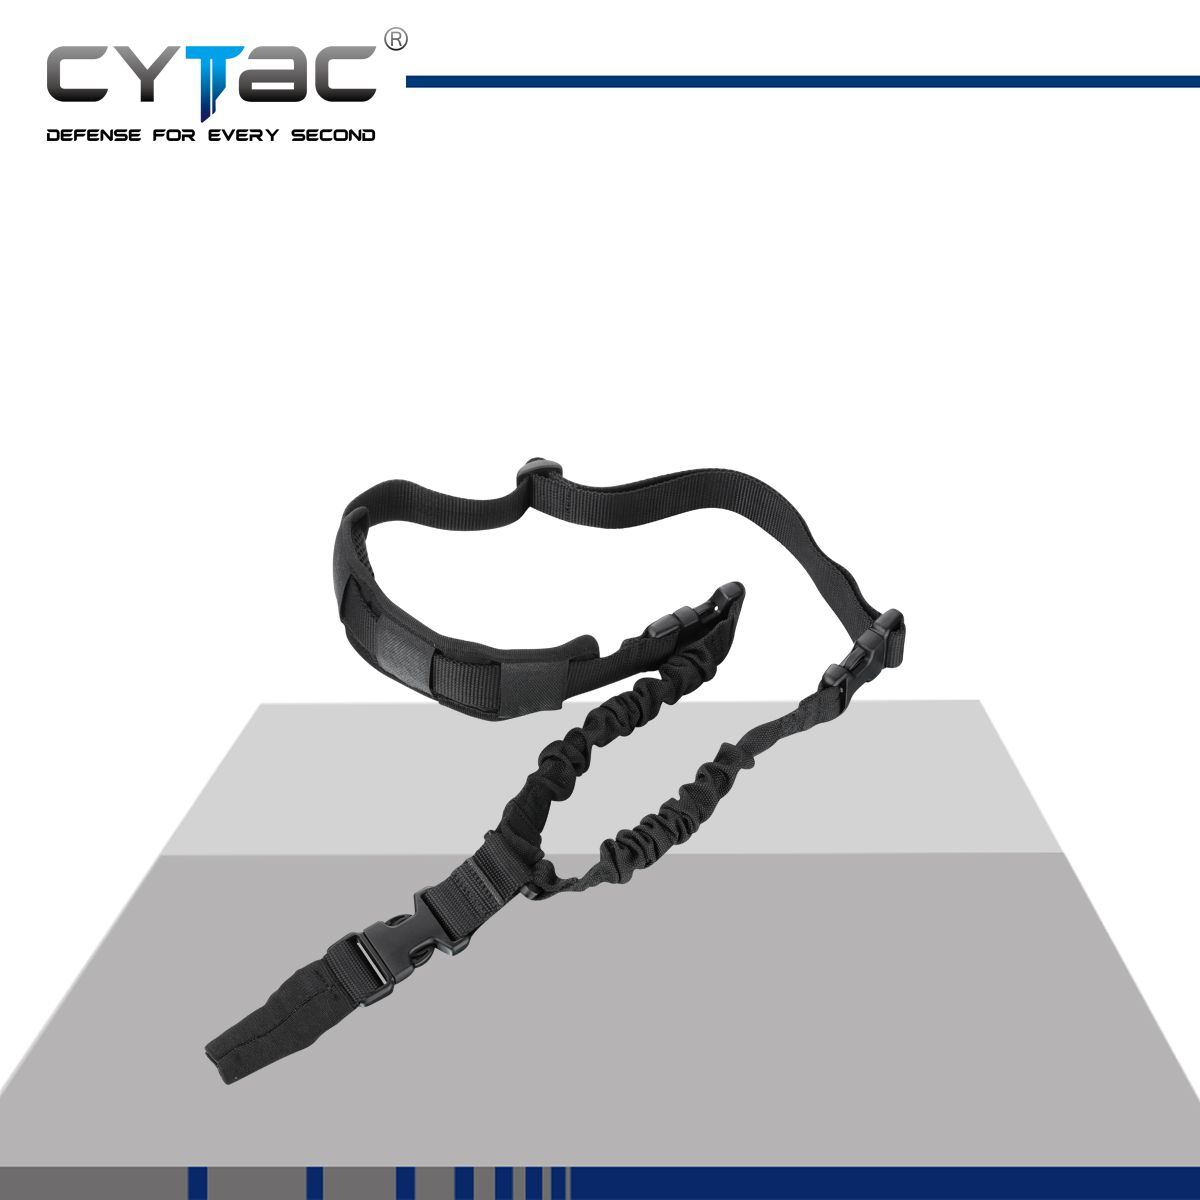 Cytac 1 point Tactical Sling + Swivel